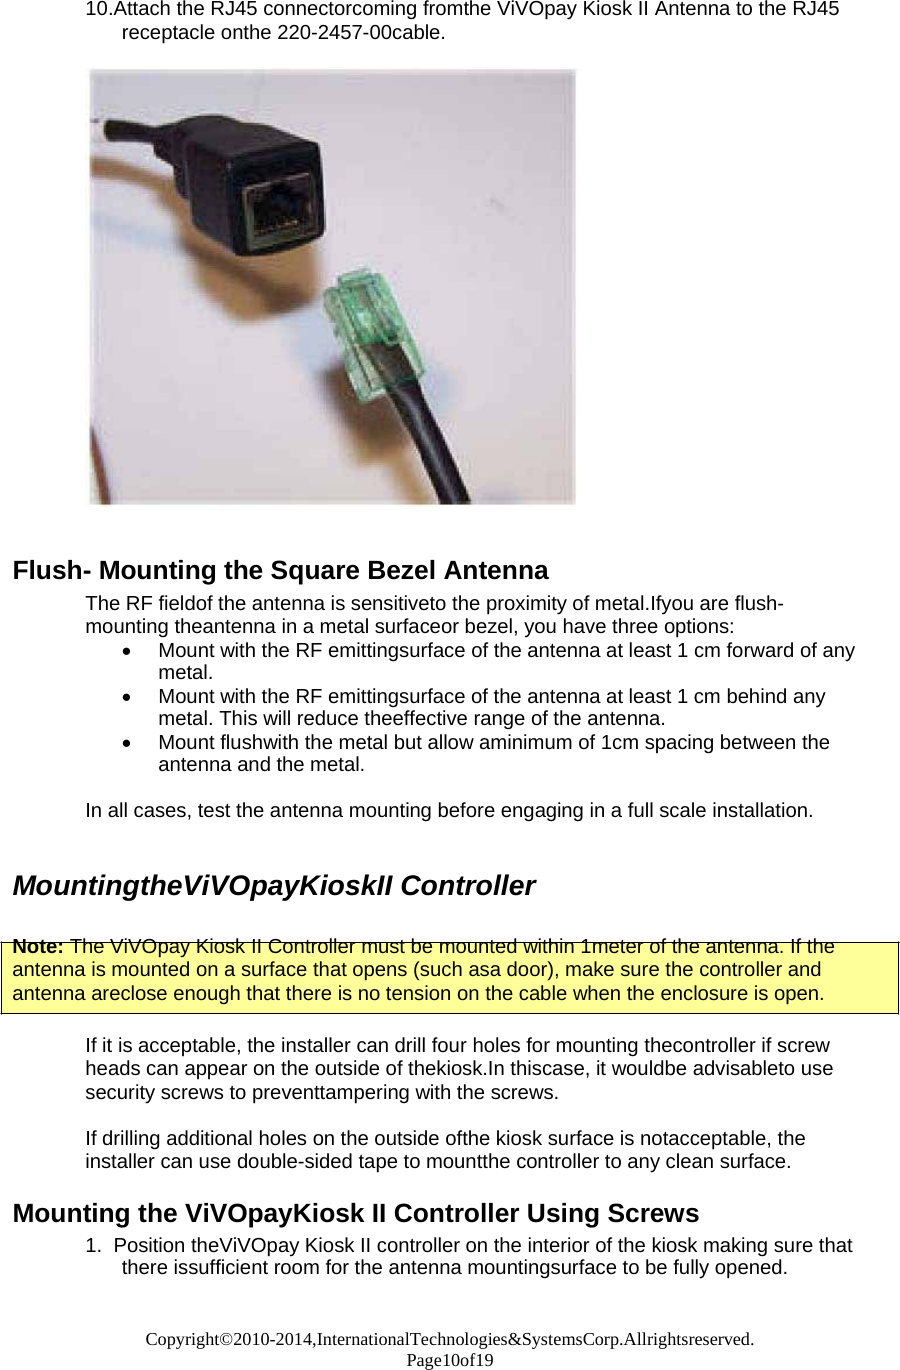 Copyright©2010-2014,InternationalTechnologies&amp;SystemsCorp.Allrightsreserved. Page10of19  10.Attach the RJ45 connectorcoming fromthe ViVOpay Kiosk II Antenna to the RJ45 receptacle onthe 220-2457-00cable.     Flush- Mounting the Square Bezel Antenna The RF fieldof the antenna is sensitiveto the proximity of metal.Ifyou are flush- mounting theantenna in a metal surfaceor bezel, you have three options:  Mount with the RF emittingsurface of the antenna at least 1 cm forward of any metal.  Mount with the RF emittingsurface of the antenna at least 1 cm behind any metal. This will reduce theeffective range of the antenna.  Mount flushwith the metal but allow aminimum of 1cm spacing between the antenna and the metal.  In all cases, test the antenna mounting before engaging in a full scale installation.   MountingtheViVOpayKioskII Controller   Note: The ViVOpay Kiosk II Controller must be mounted within 1meter of the antenna. If the antenna is mounted on a surface that opens (such asa door), make sure the controller and antenna areclose enough that there is no tension on the cable when the enclosure is open.  If it is acceptable, the installer can drill four holes for mounting thecontroller if screw heads can appear on the outside of thekiosk.In thiscase, it wouldbe advisableto use security screws to preventtampering with the screws.  If drilling additional holes on the outside ofthe kiosk surface is notacceptable, the installer can use double-sided tape to mountthe controller to any clean surface.  Mounting the ViVOpayKiosk II Controller Using Screws 1.  Position theViVOpay Kiosk II controller on the interior of the kiosk making sure that there issufficient room for the antenna mountingsurface to be fully opened.